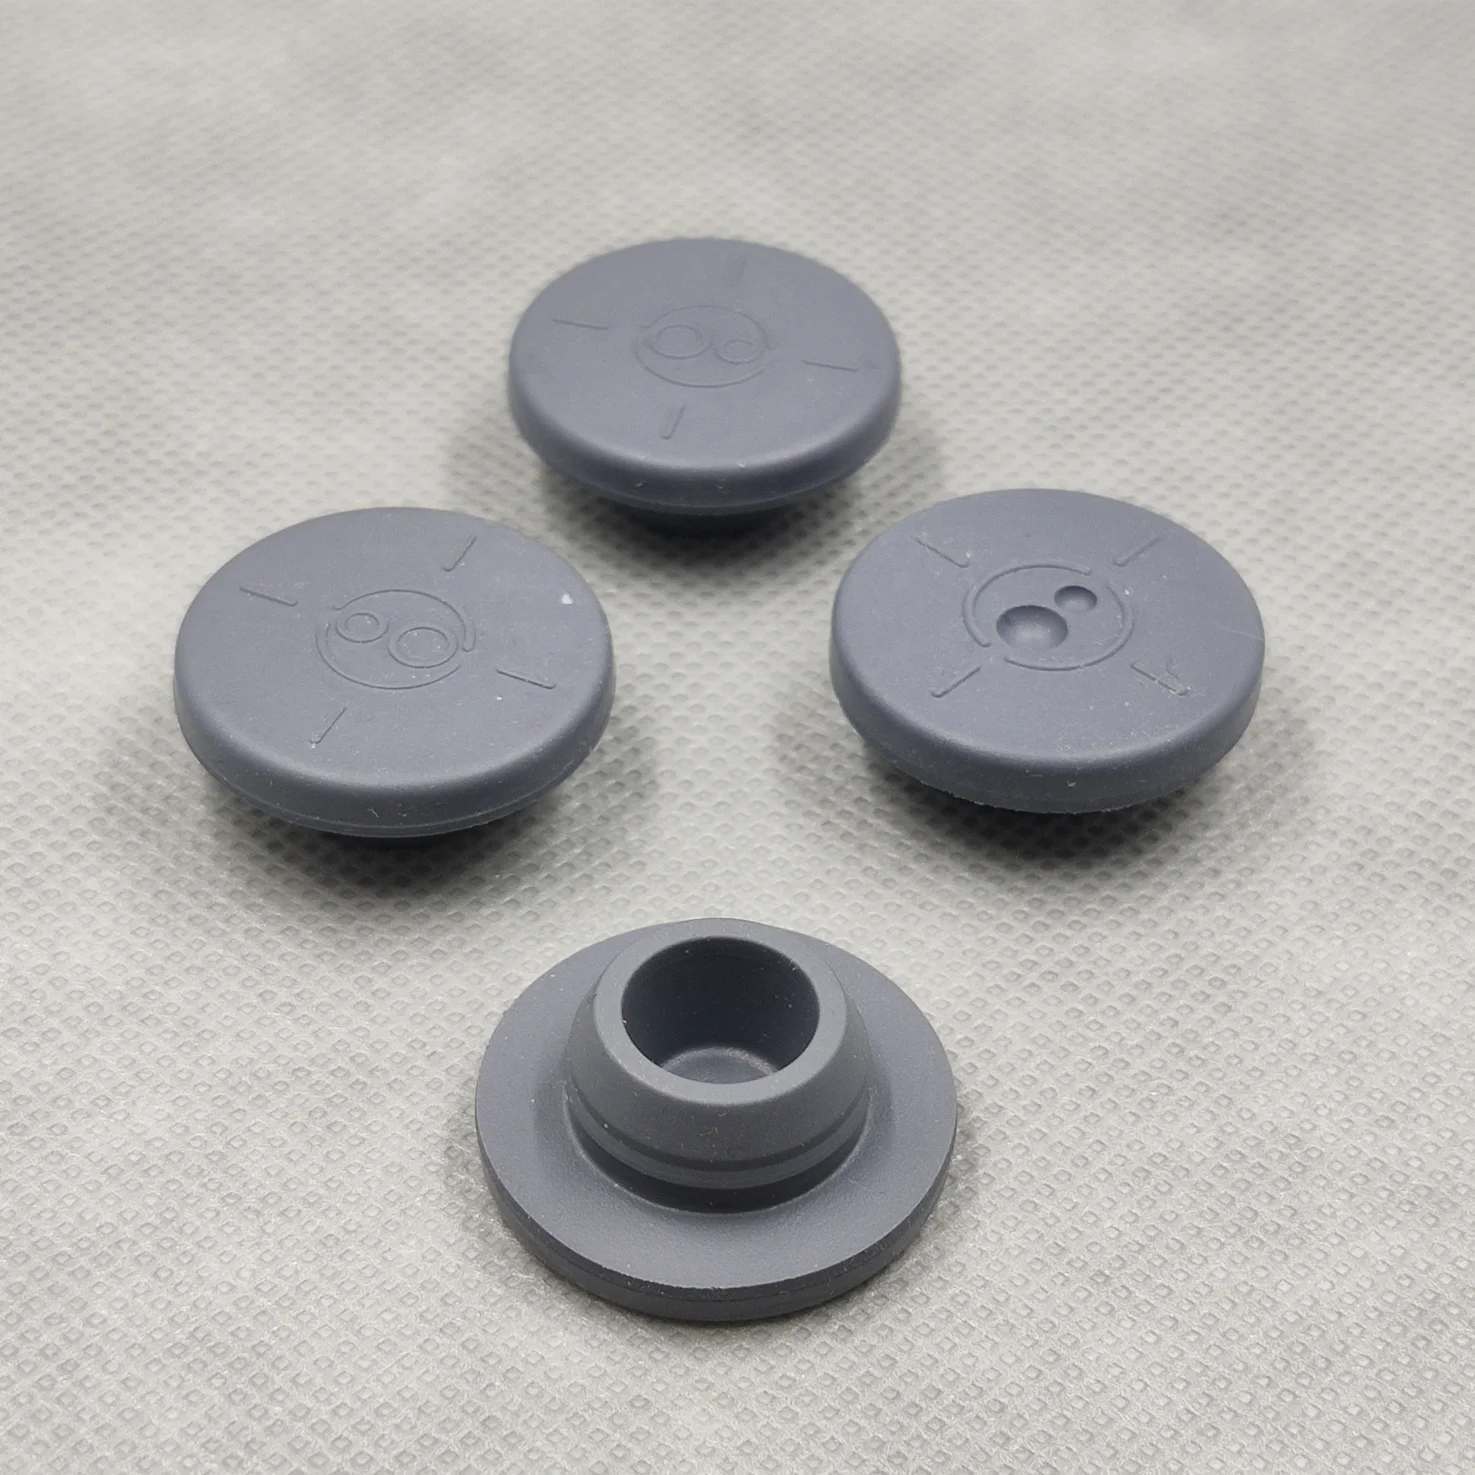 20mm medical rubber IV bag stopper for infusion and injection